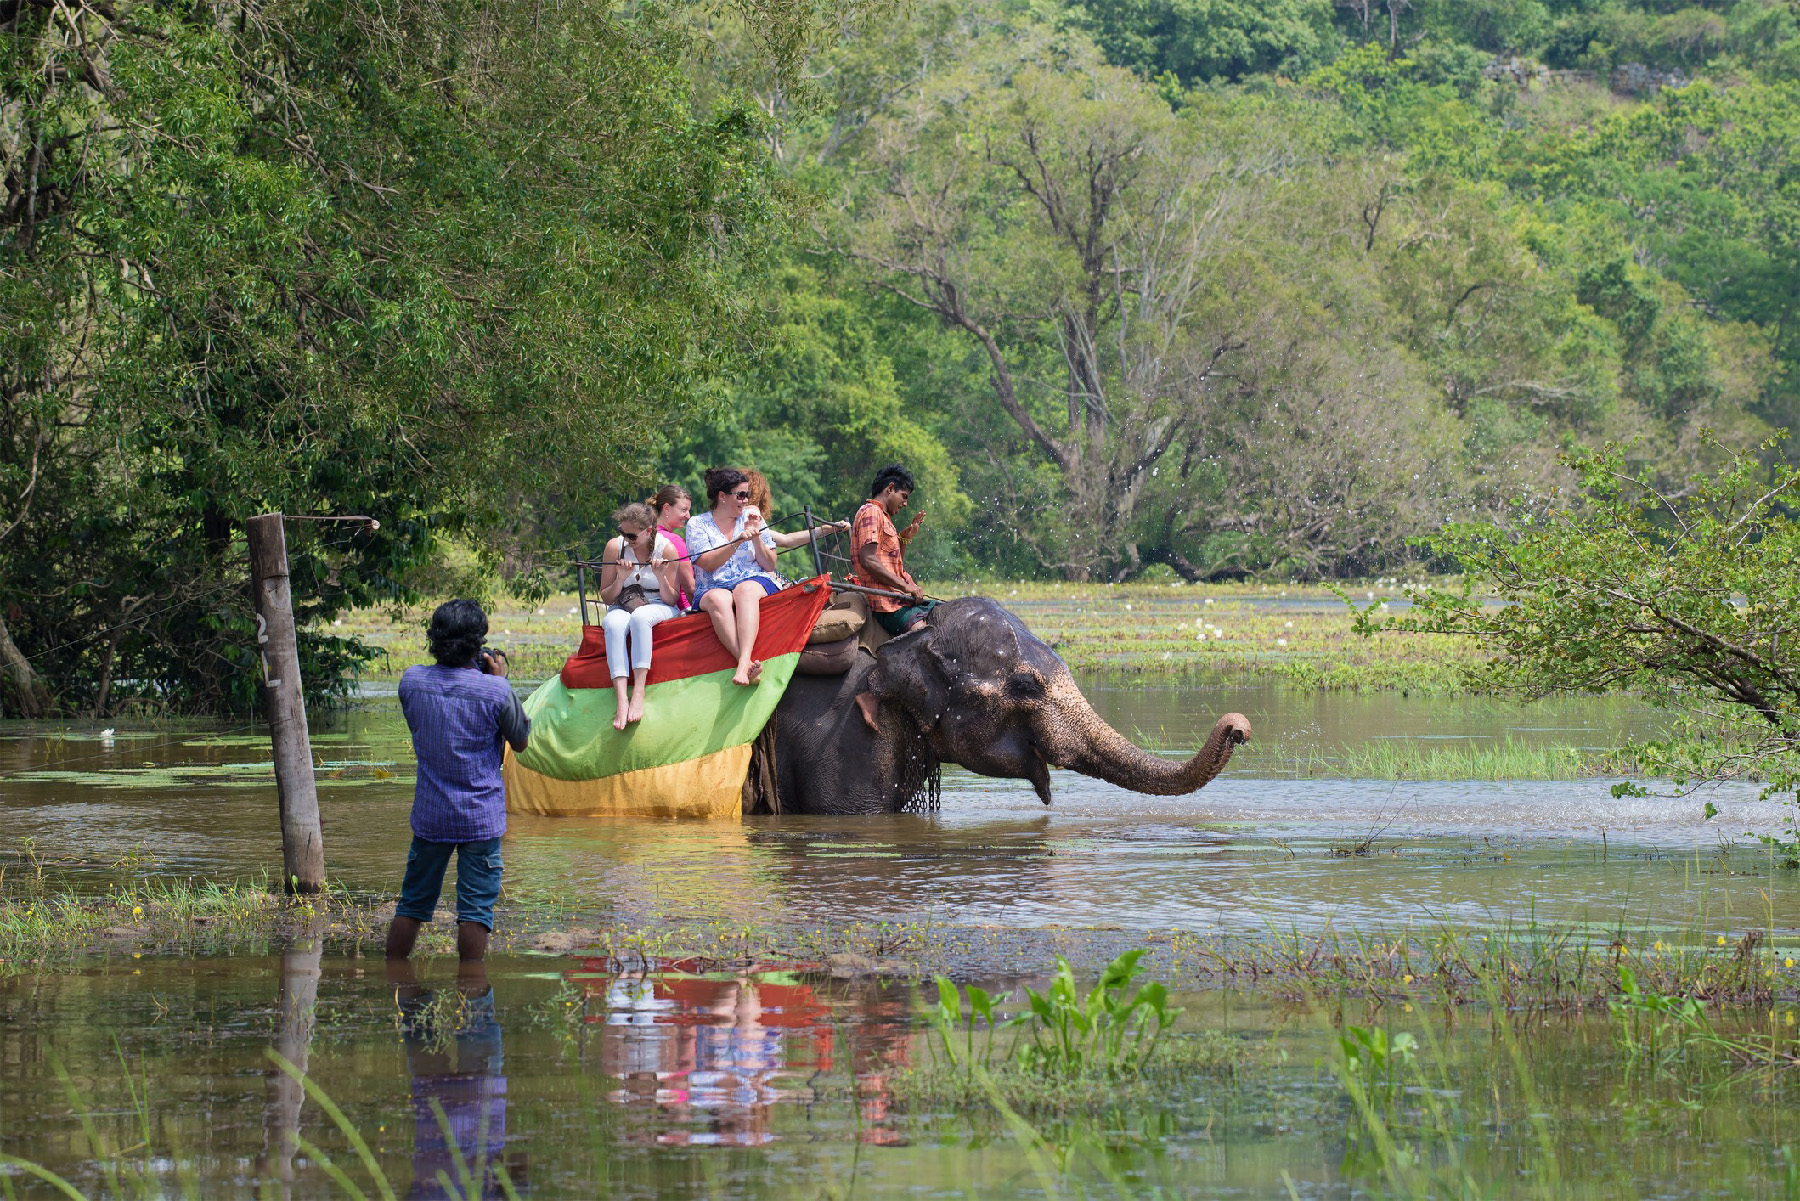 people riding an elephant wading through water